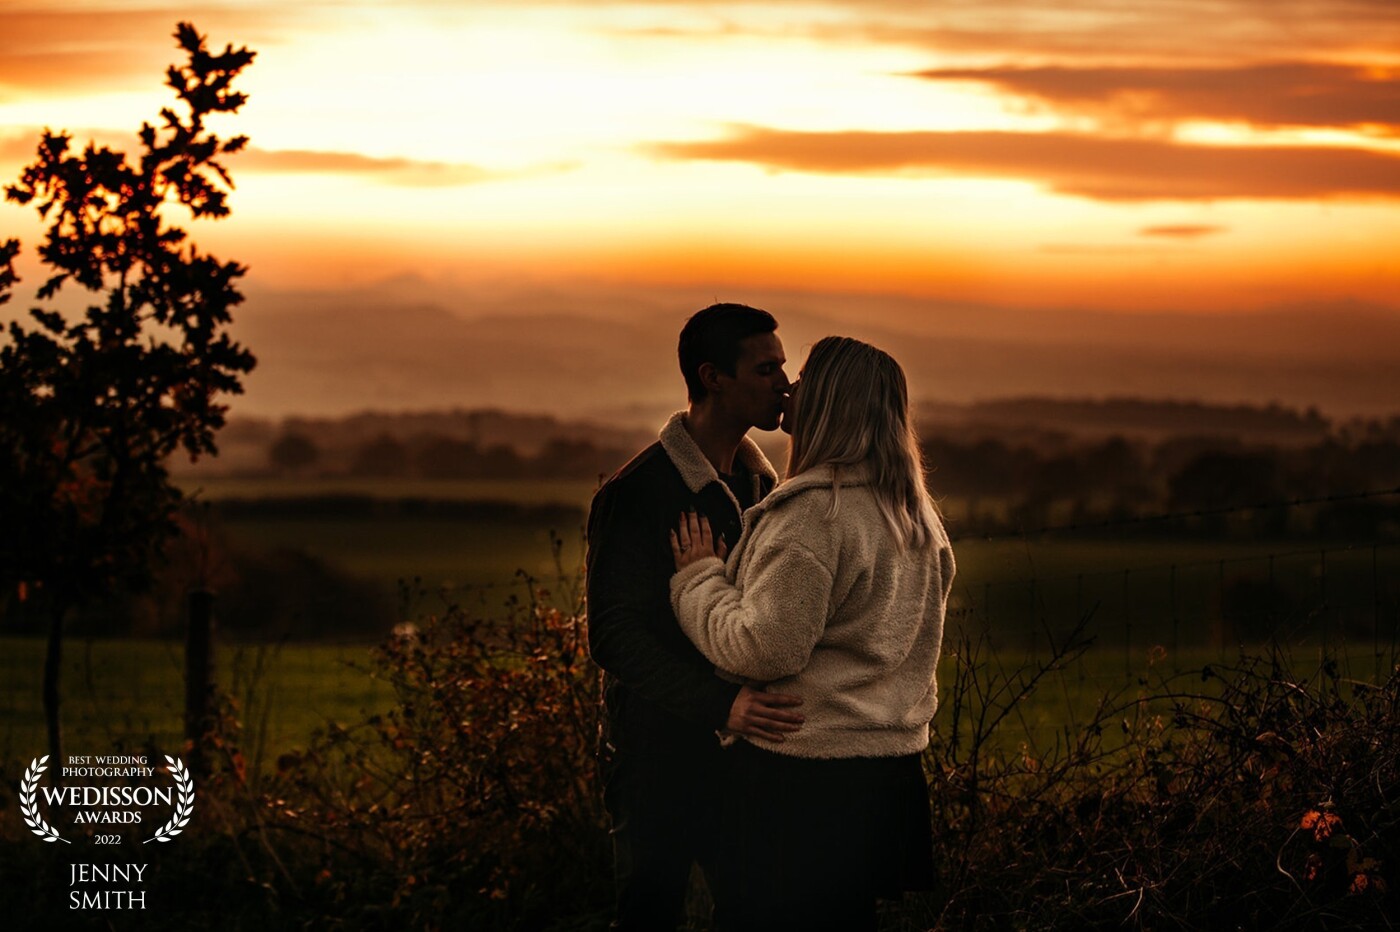 We shot Karen & Craig’s pre-wedding photos in the lovely village of Little Wenlock where they live. The village overlooks the Wreakin and has lots of lovely countryside trails. We planned for golden hour and got so many romantic sunset photos.